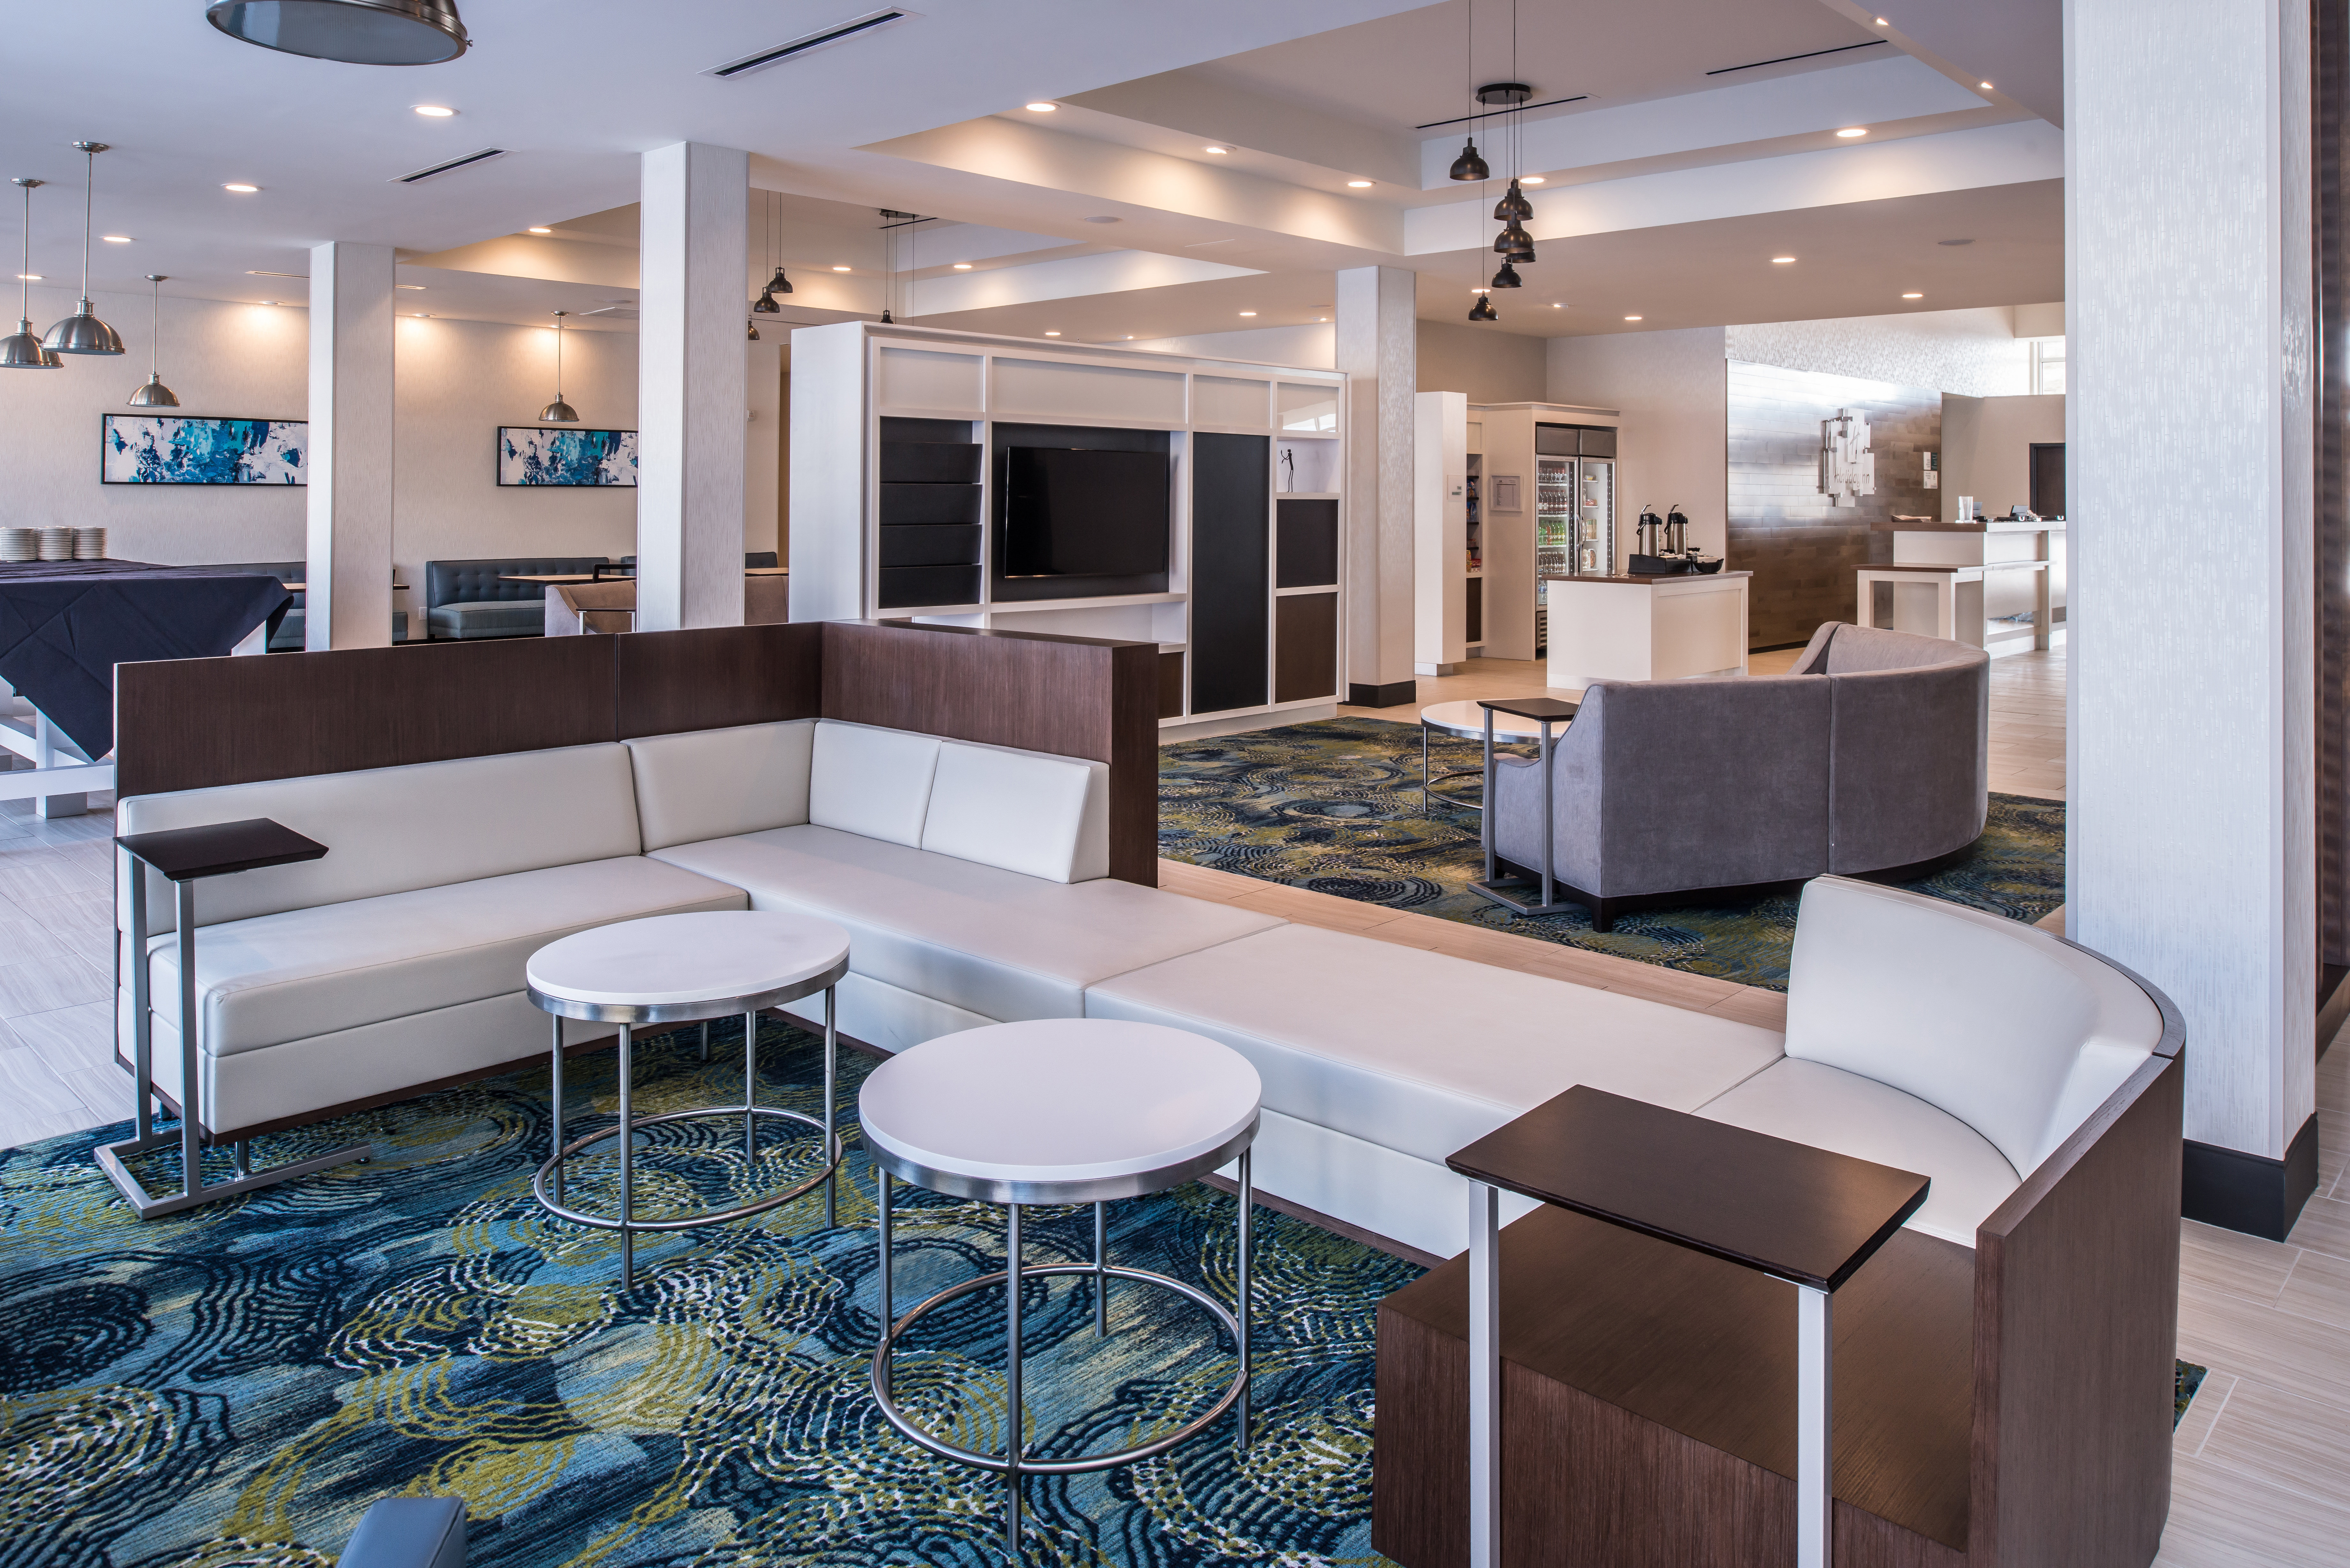 Welcome to Holiday Inn, located in the heart of Livonia.